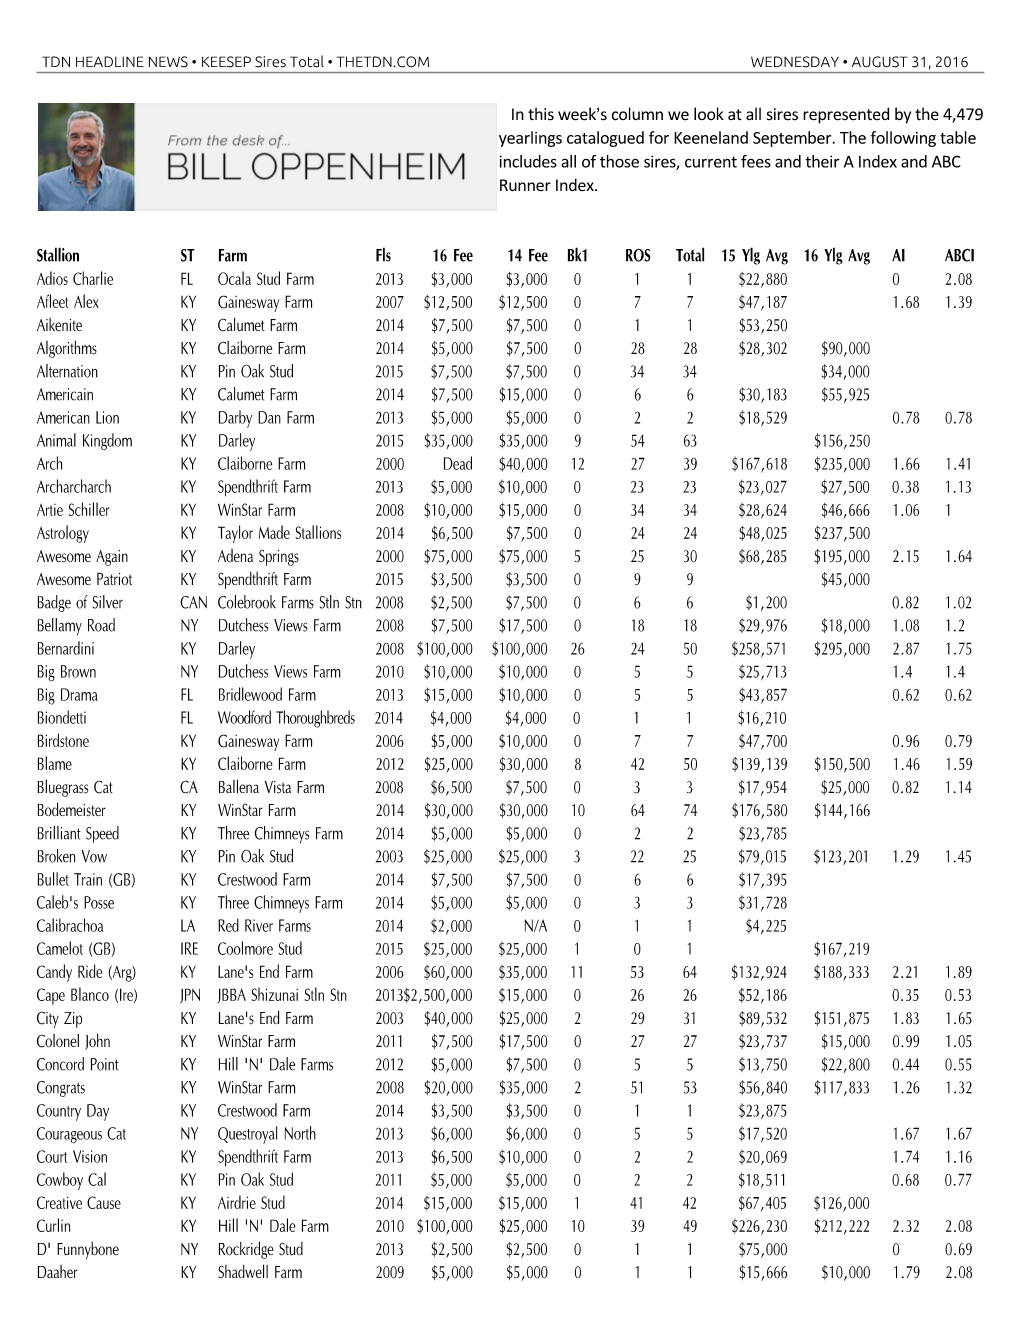 In This Week=S Column We Look at All Sires Represented by the 4,479 Yearlings Catalogued for Keeneland September. the Following